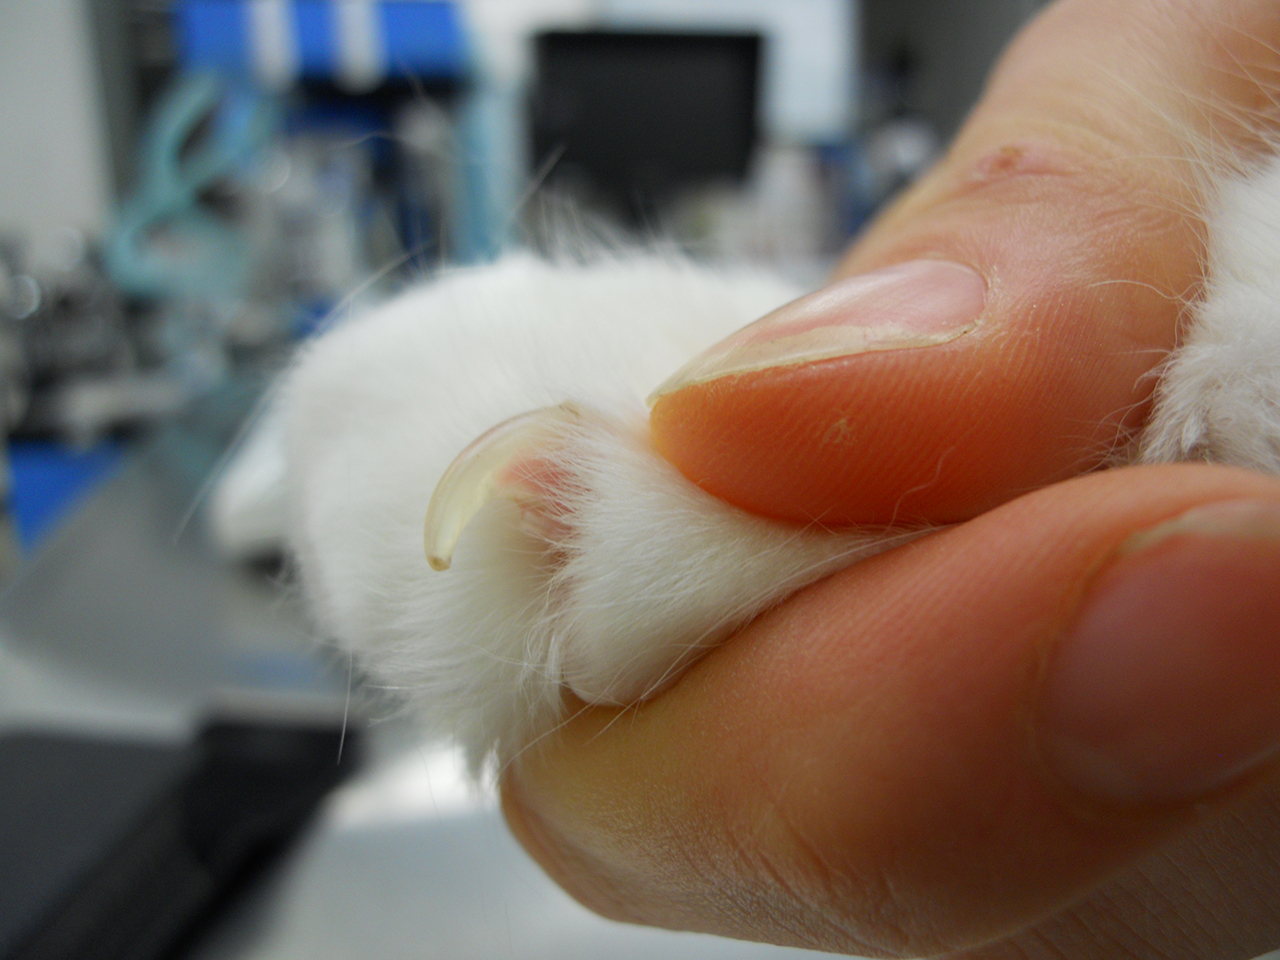 Can you use a nail file used for humans to trim a cat's claws? - Quora